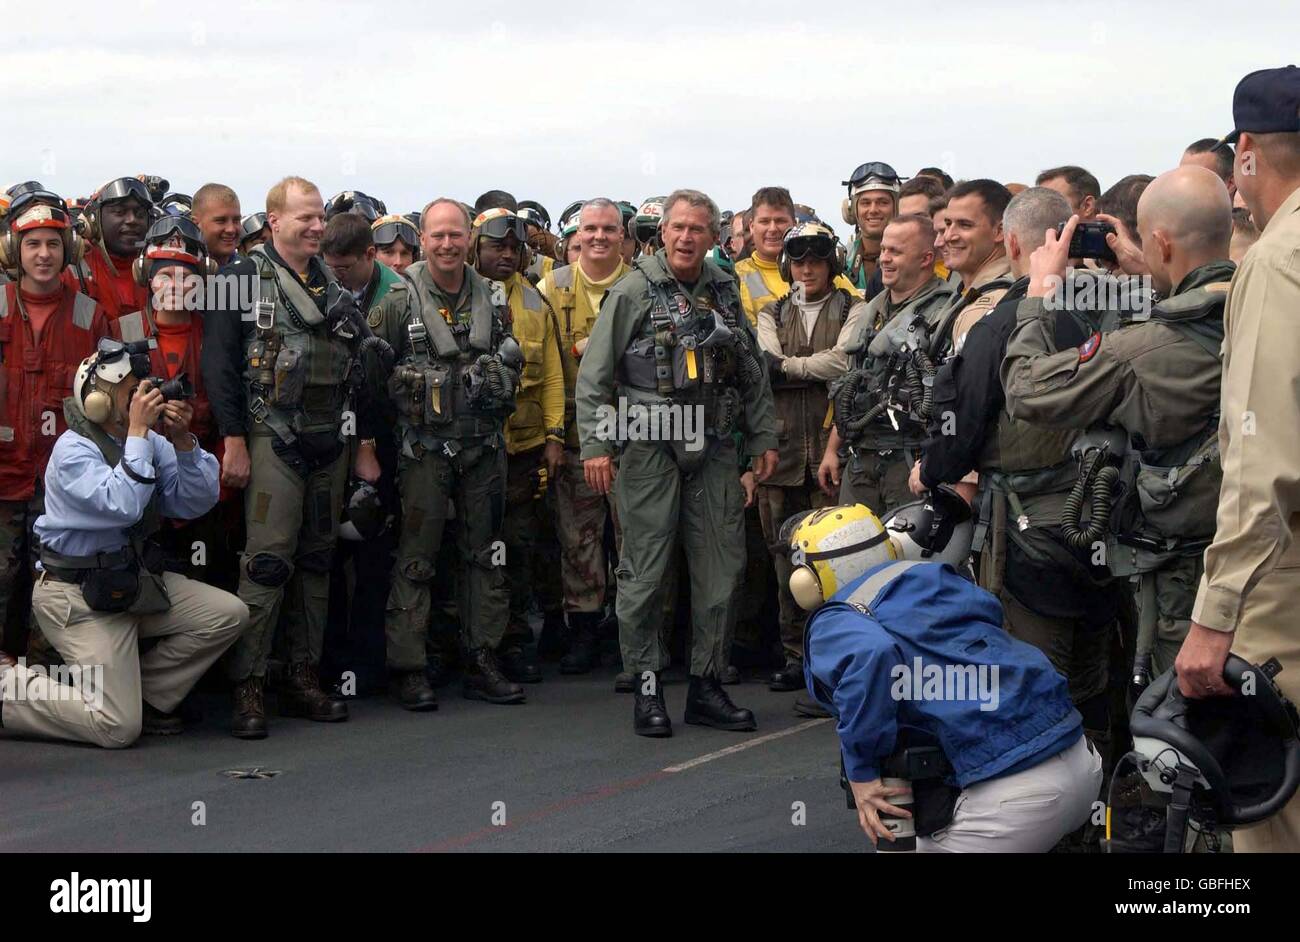 U.S. President George W. Bush poses for a photo with sailors on the flight deck after landing in a S-3B Viking aircraft on the aircraft carrier USS Abraham Lincoln during a visit May 1, 2003 in the Pacific Ocean. The Lincoln is returning from a 10-month deployment to the Arabian Gulf in support of Operation Iraqi Freedom. Stock Photo